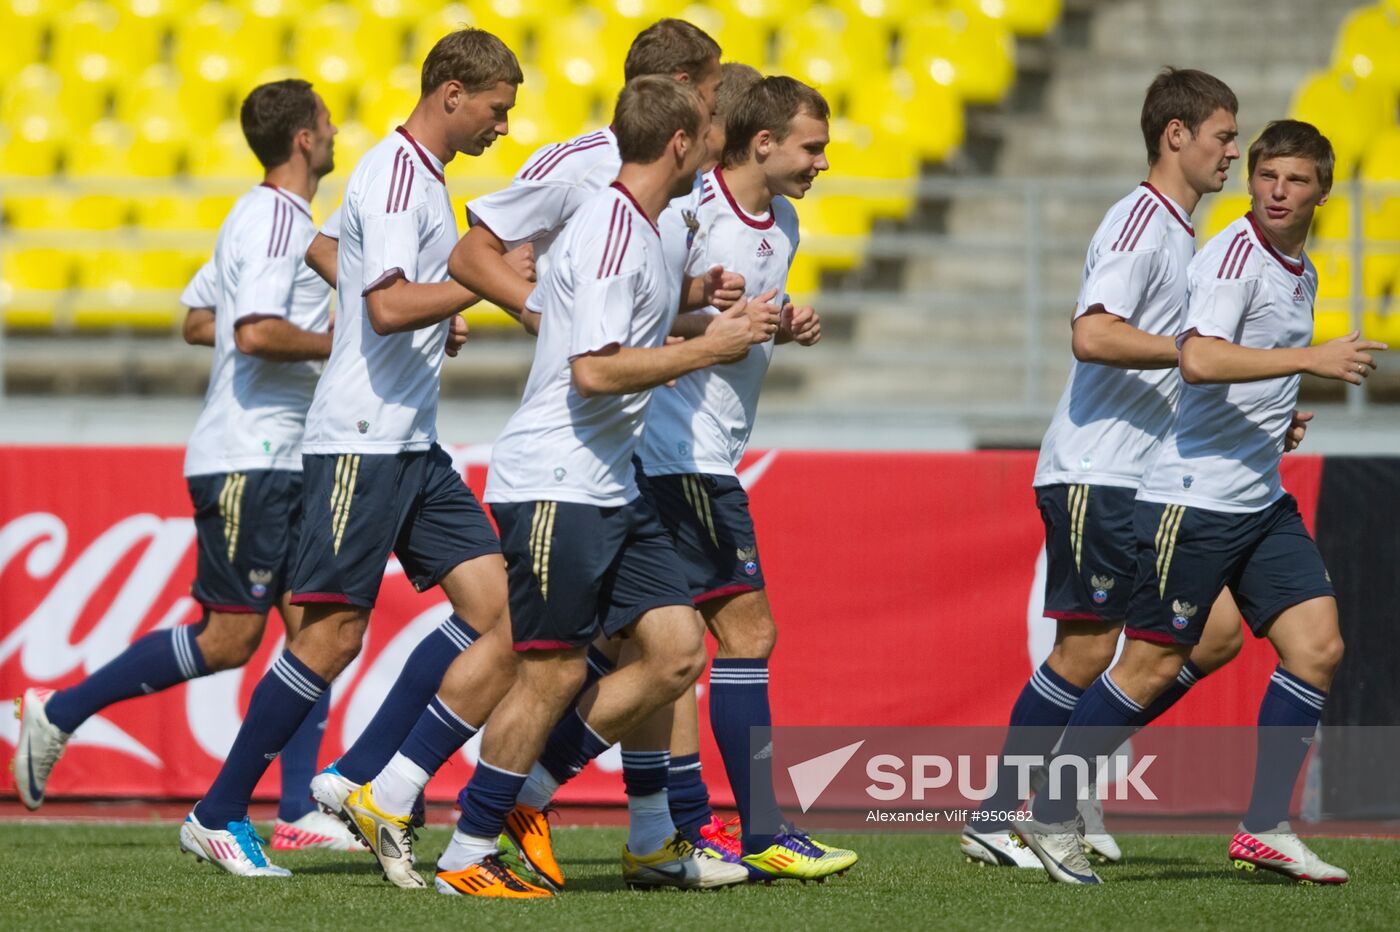 Russian national team's training session